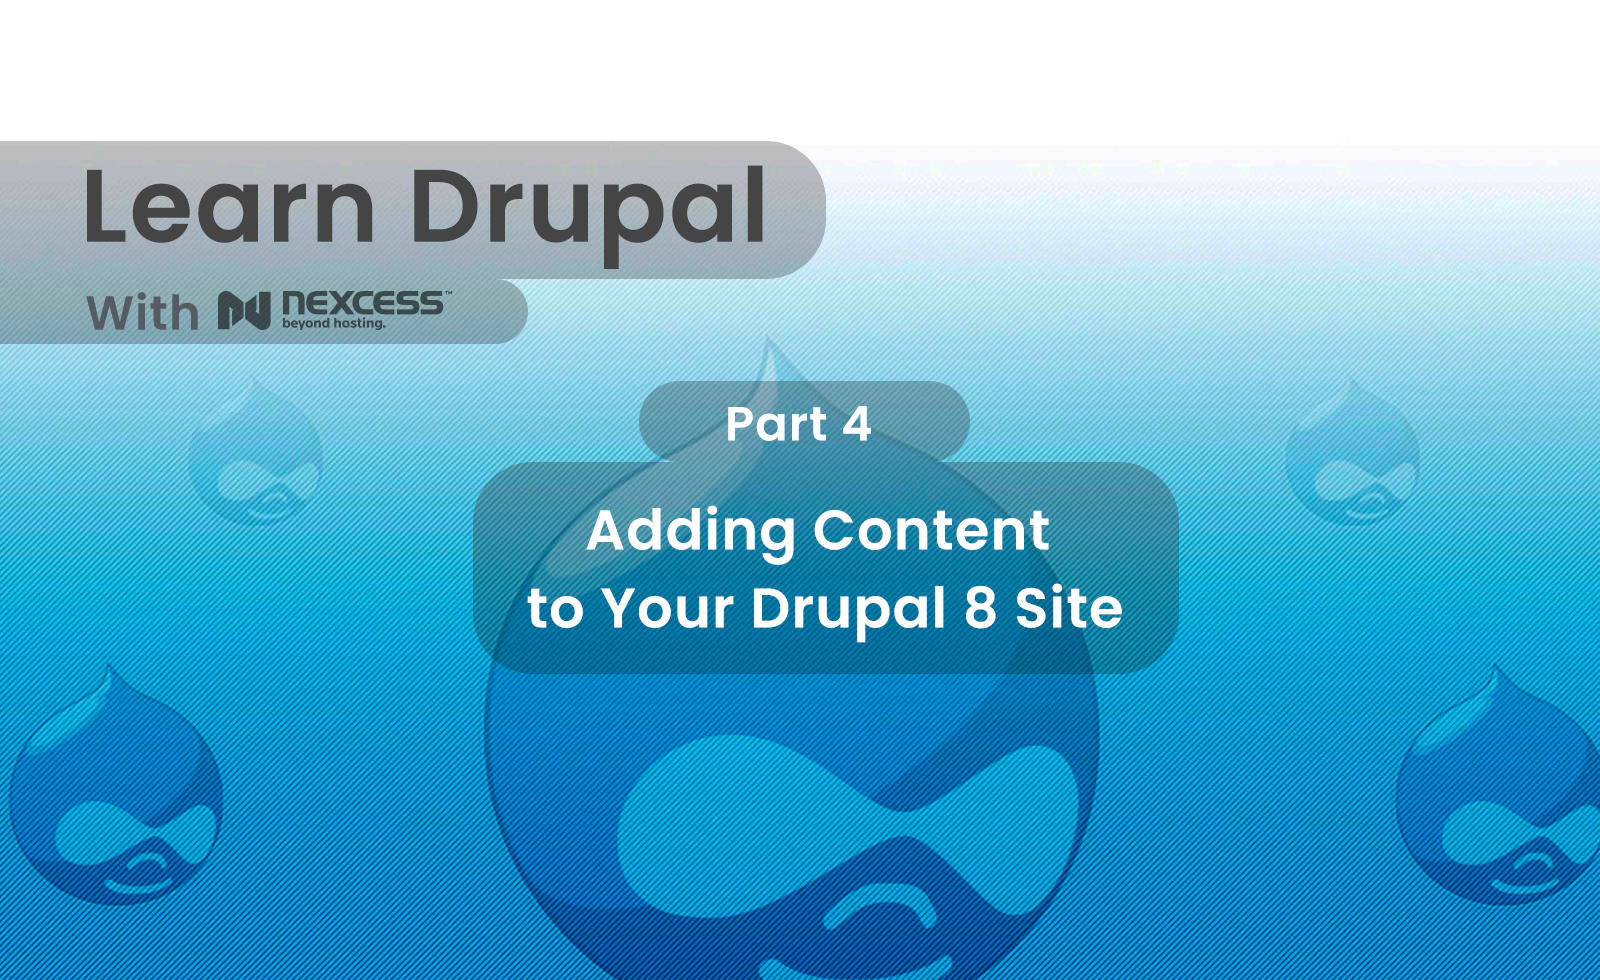 Adding Content to Your Drupal 8 Site